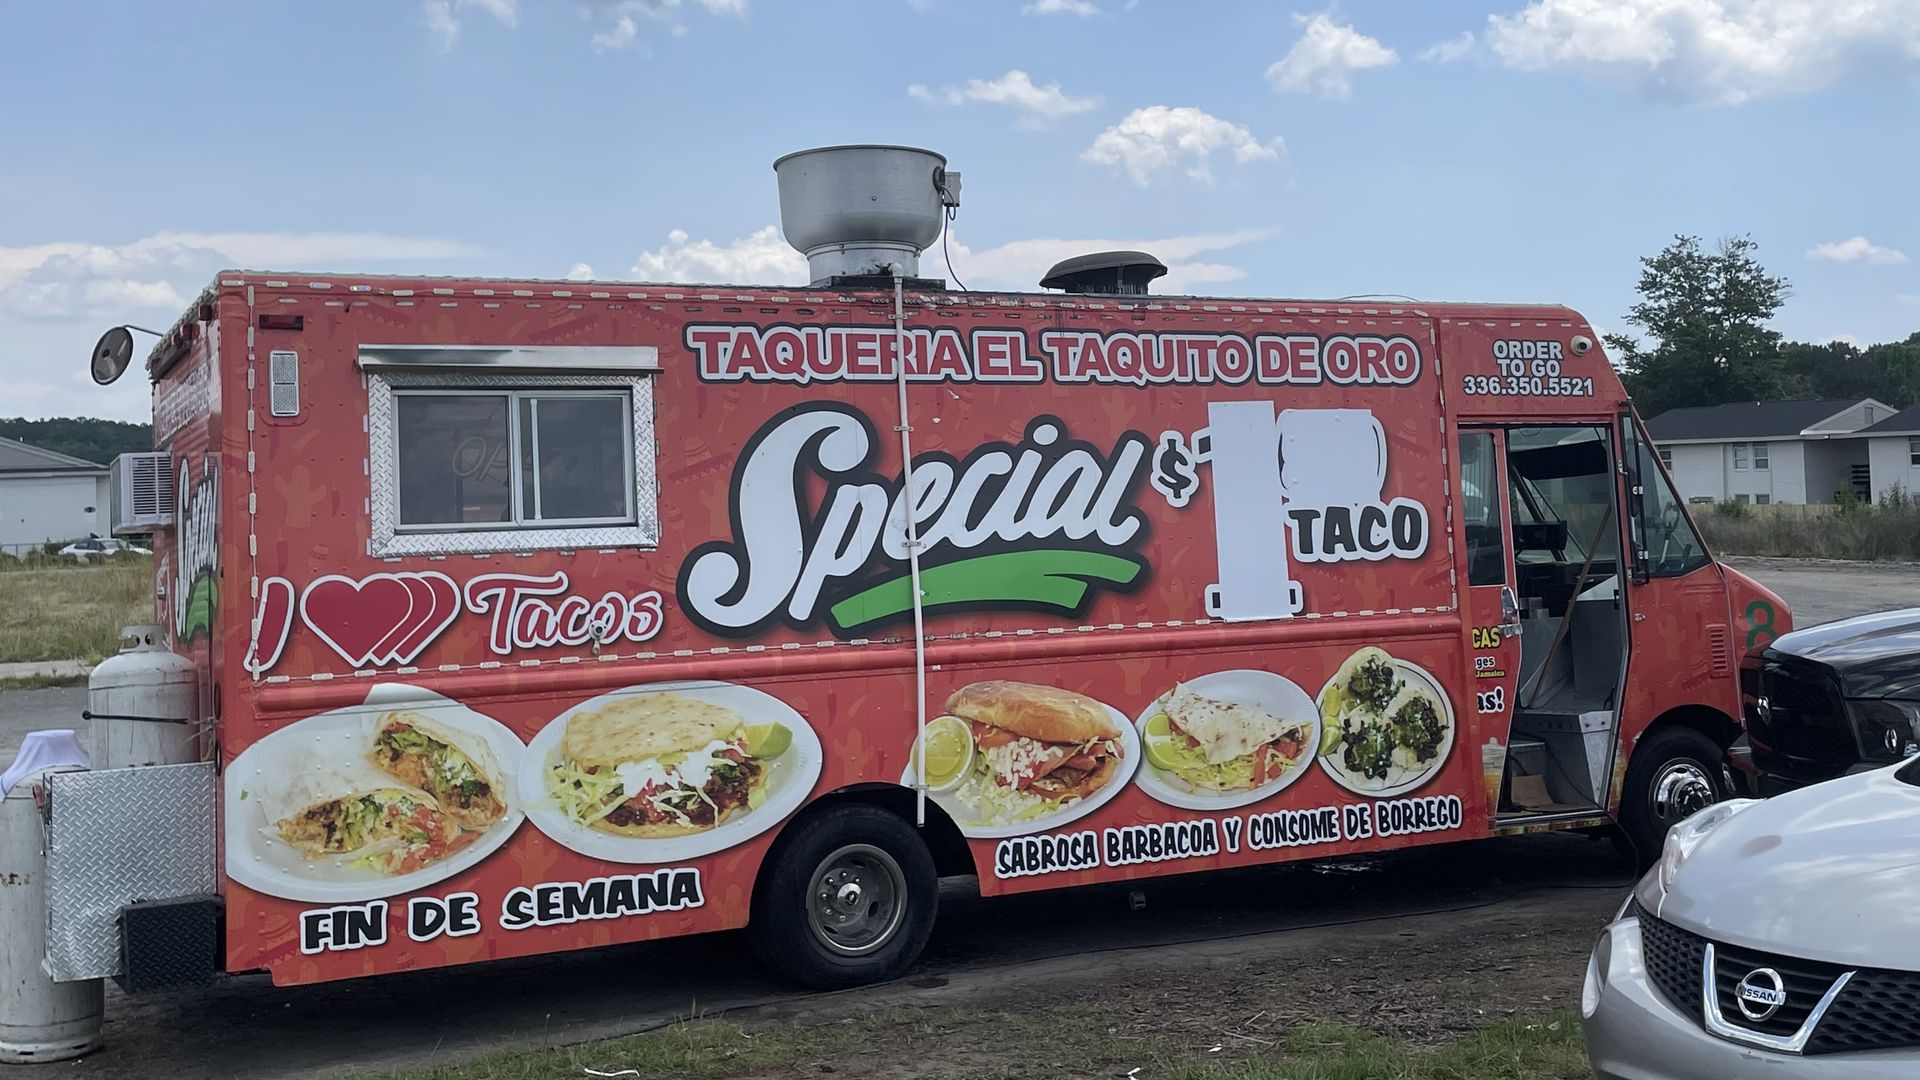 A taco truck that has covered up its $1.50 special price due to inflation. 